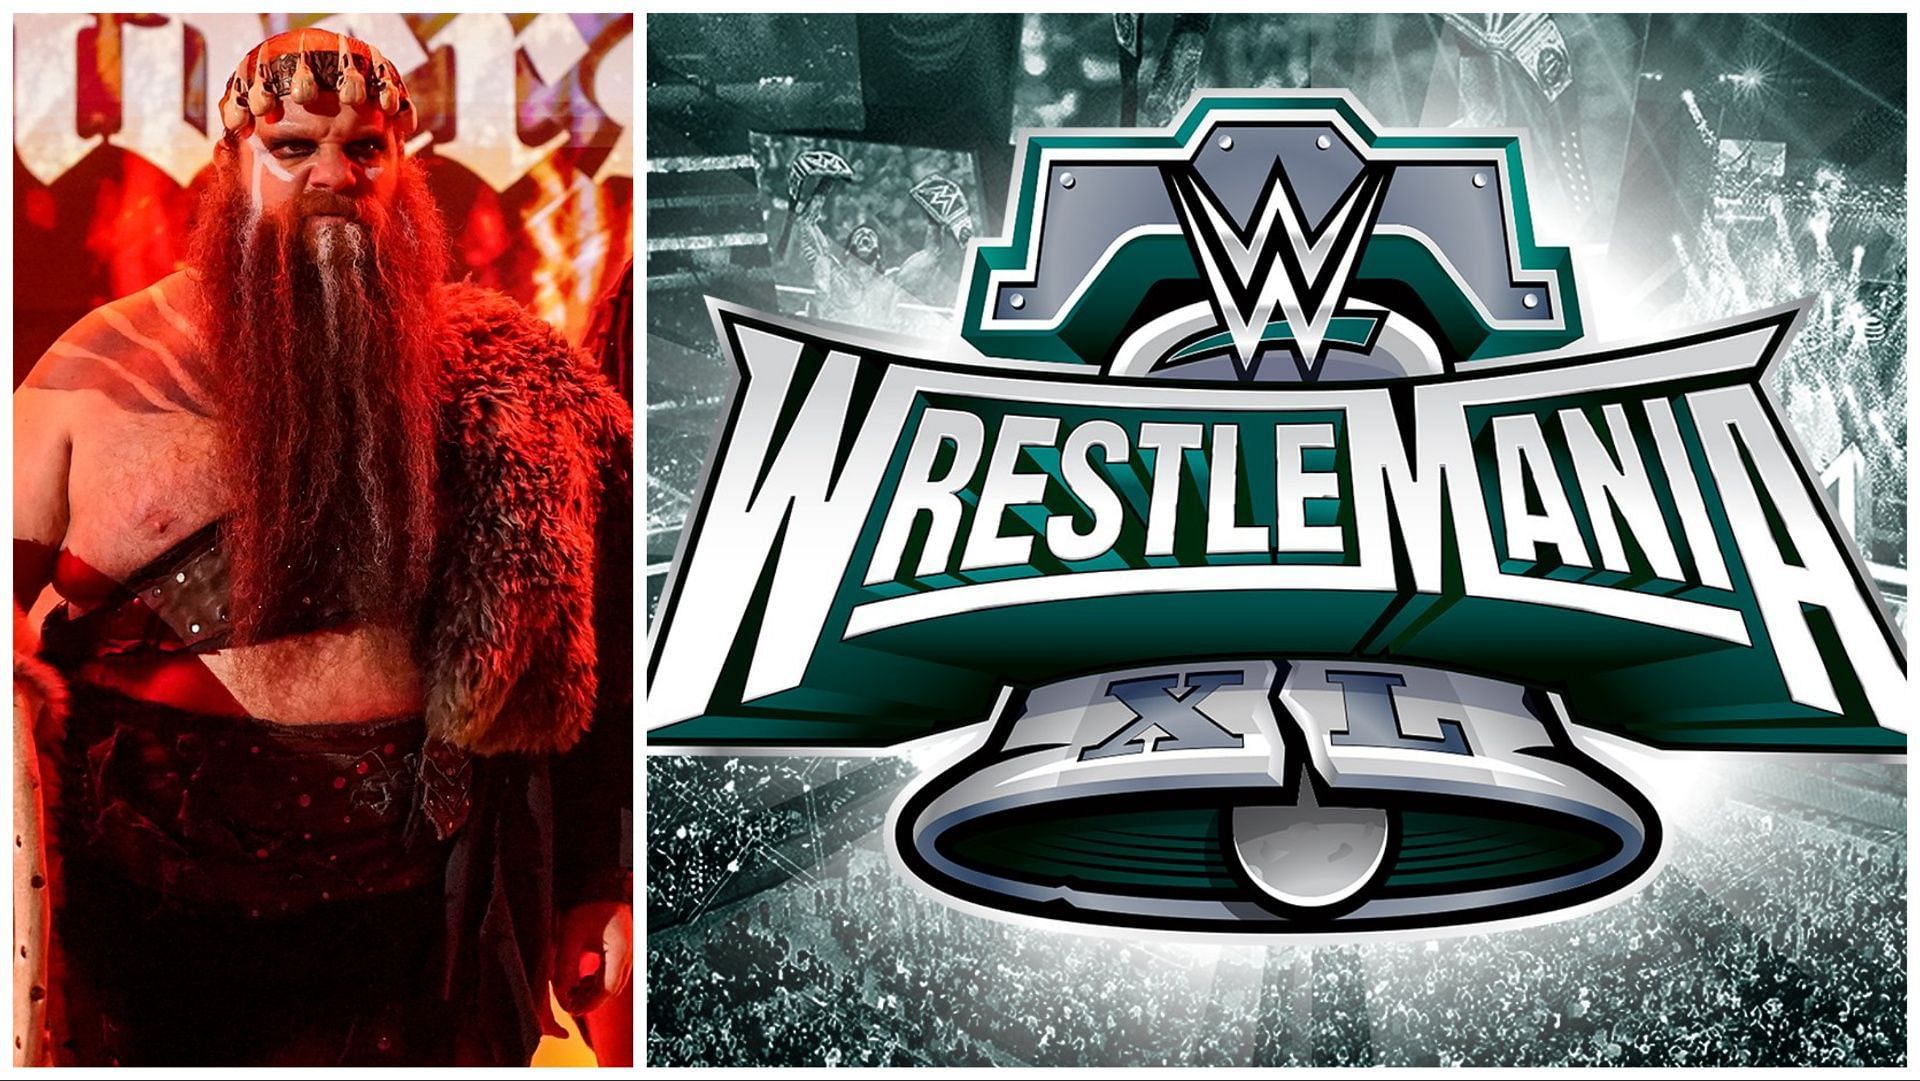 Ivar heads to the ring on WWE RAW, the official logo for WWE WrestleMania XL